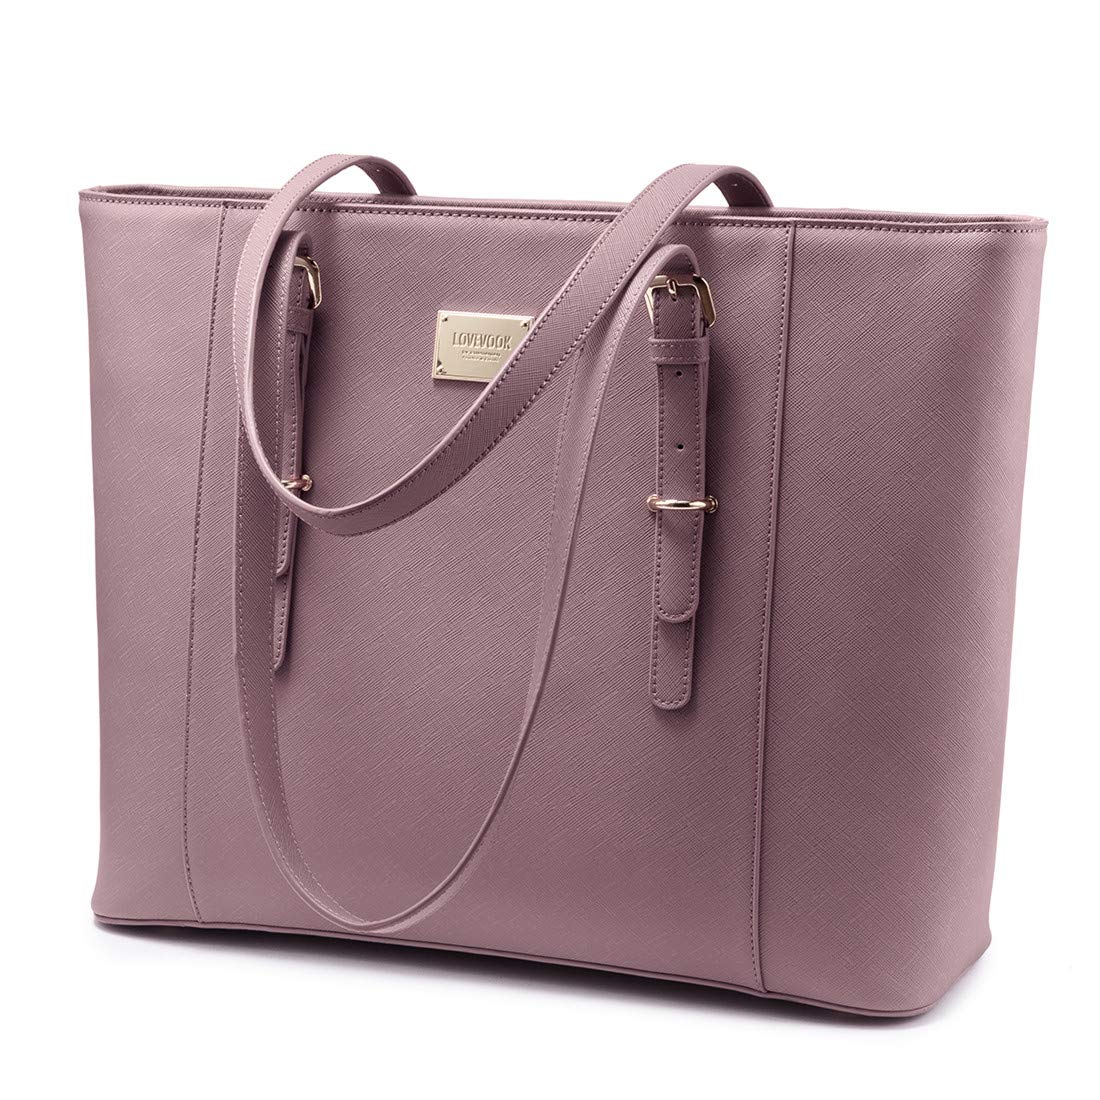 Leather laptop bag for women is an essential accessory for women who balance work, travel, and personal pursuits.